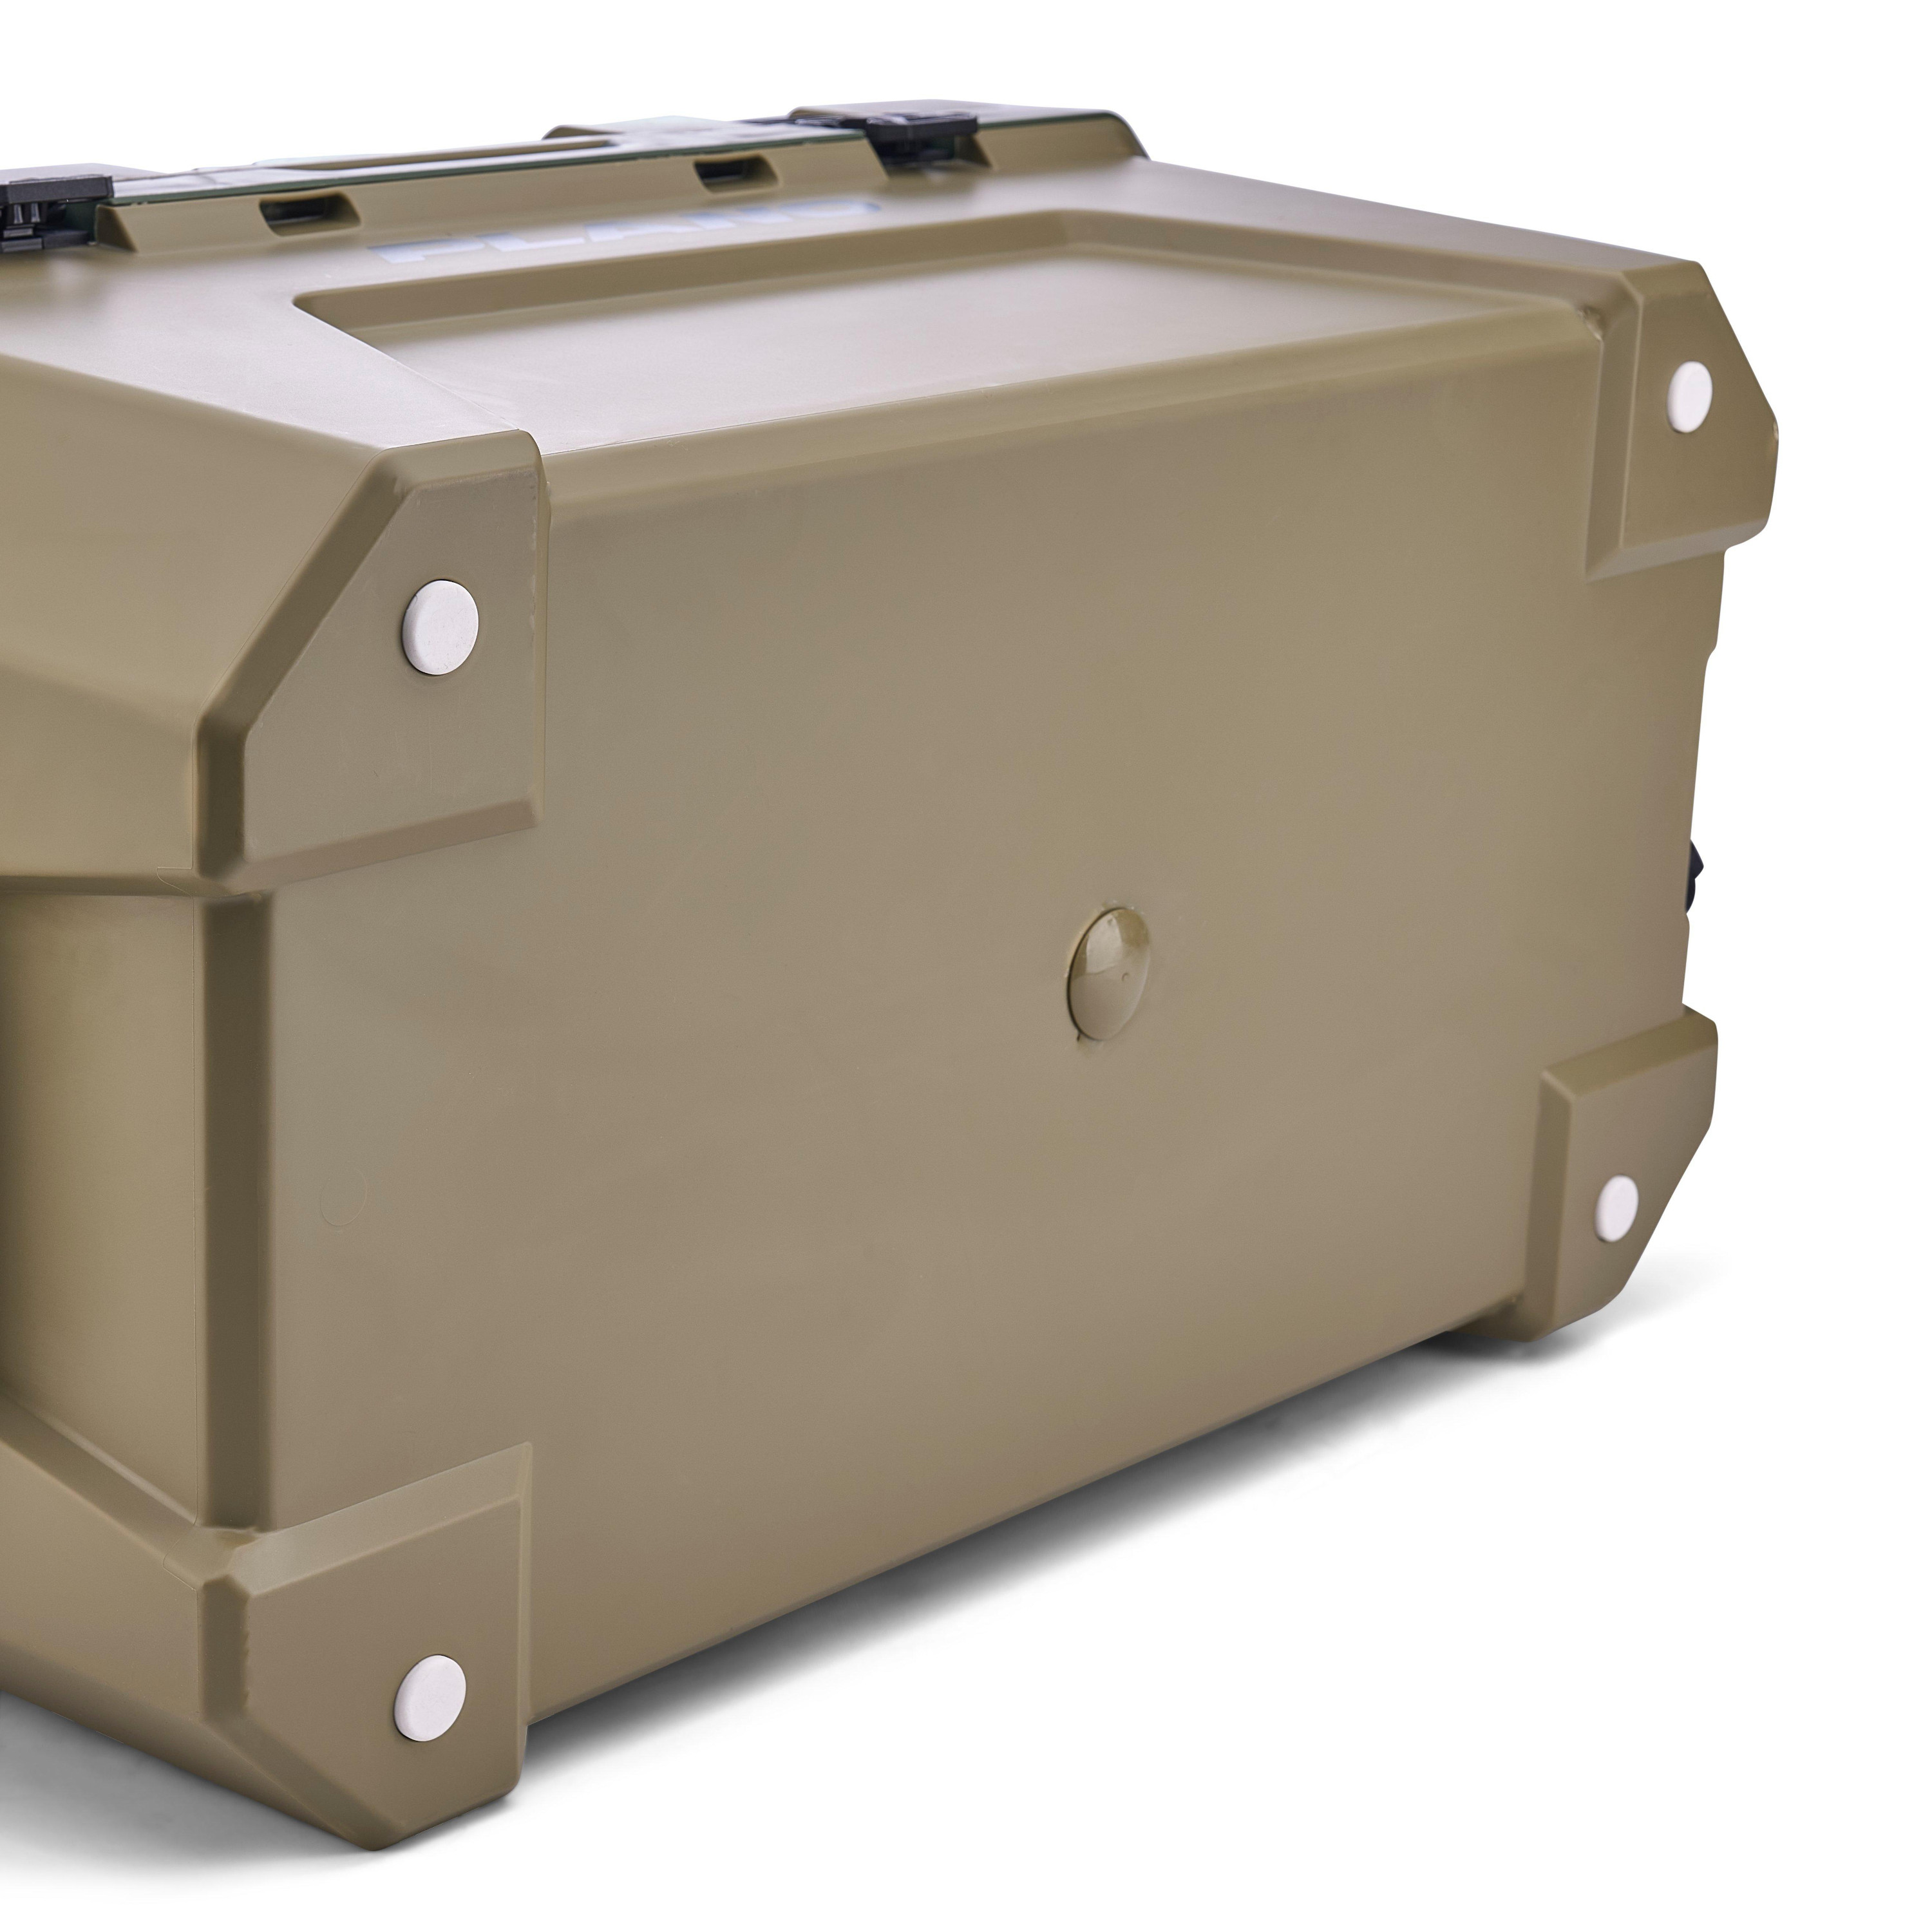 Plano Frost Hard Cooler 30L - Inland Green